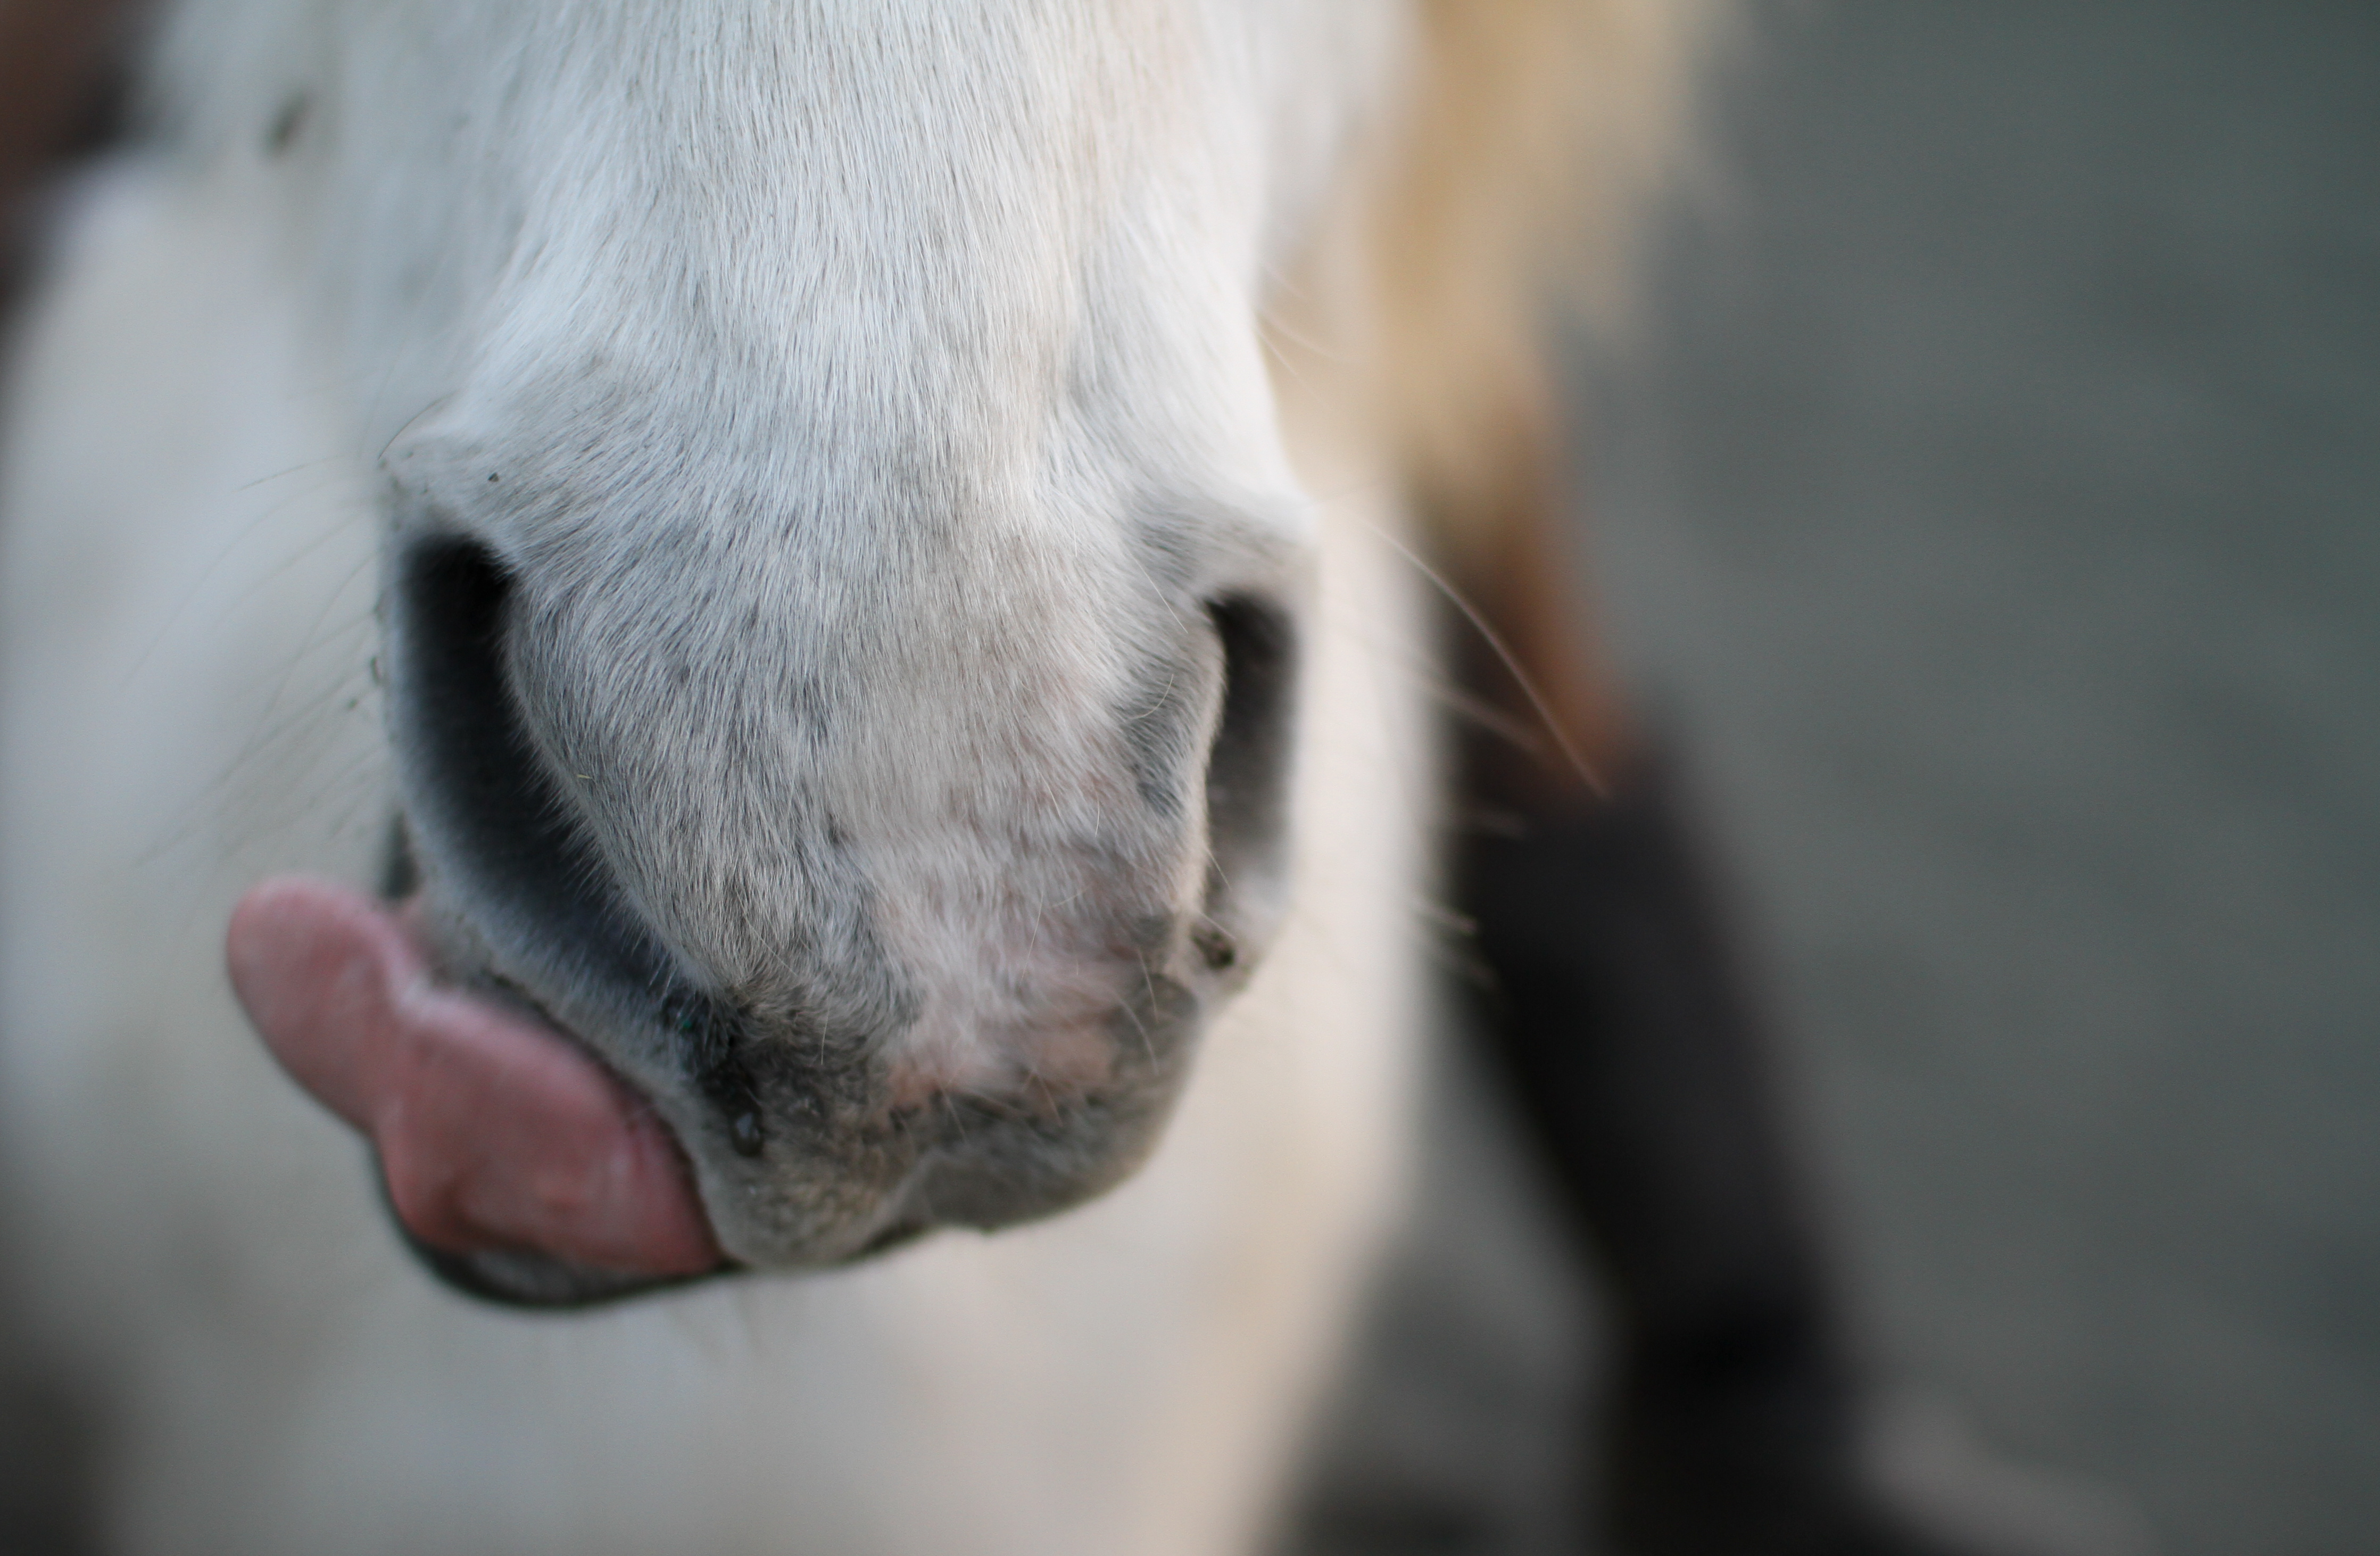 A horse sticking his tongue out.